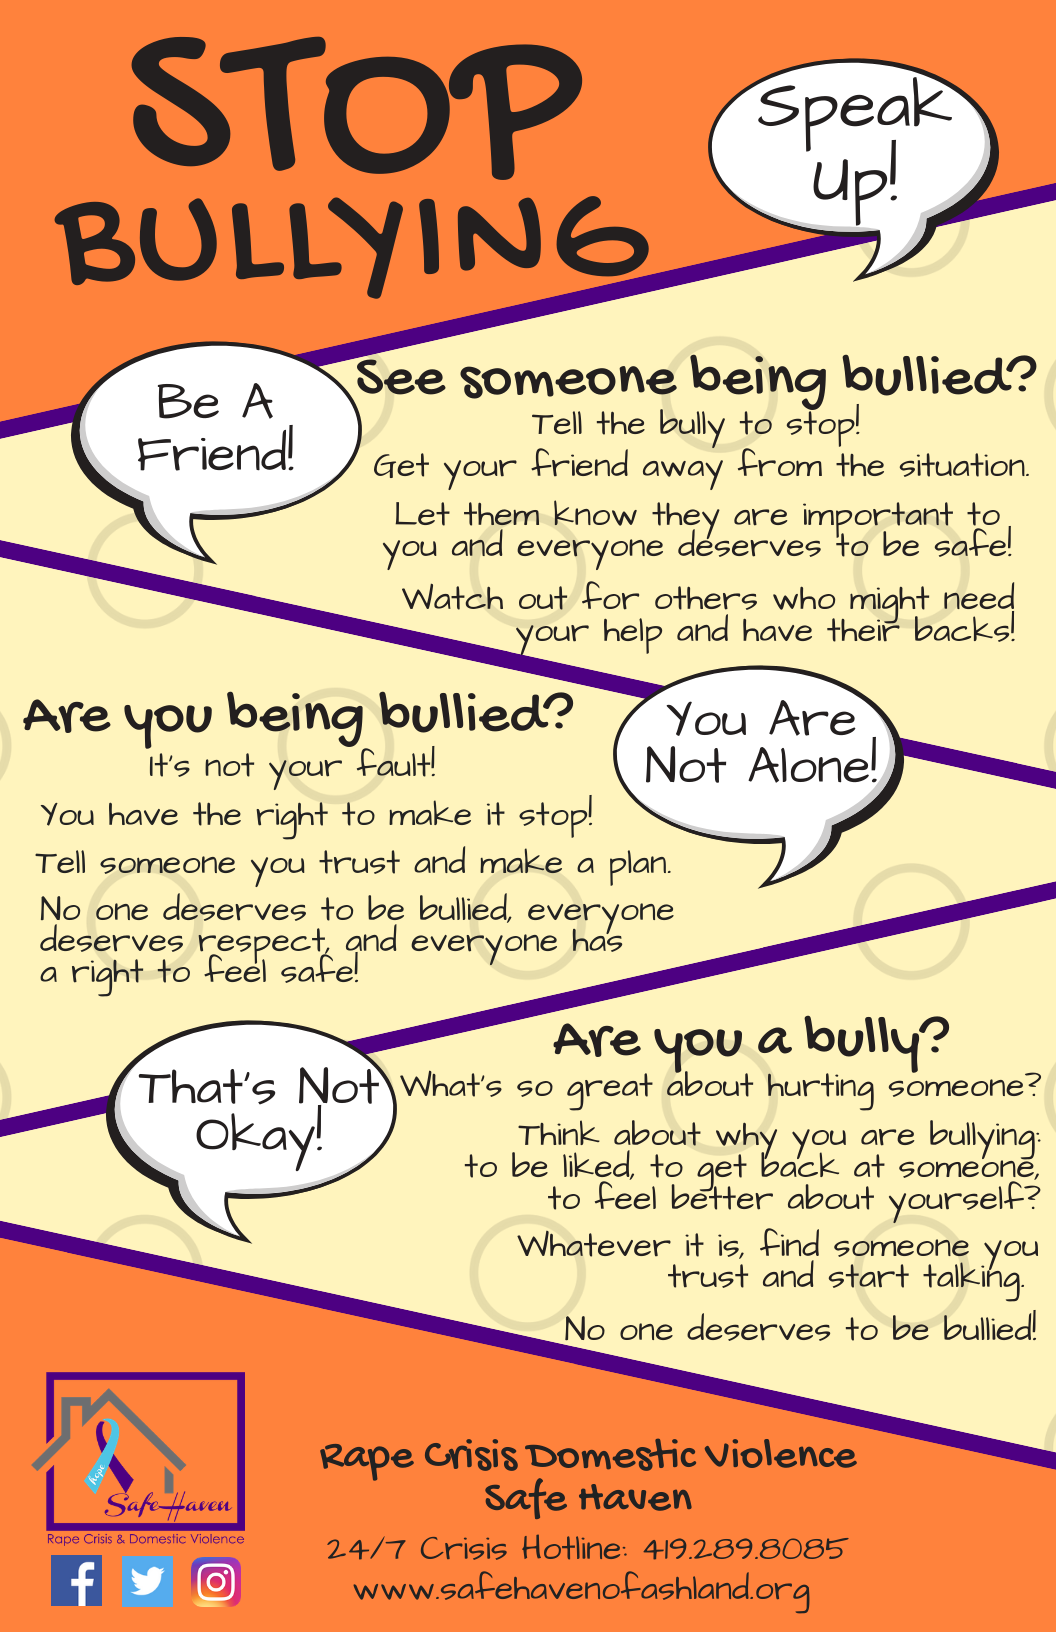 Can Bullying Lead To An Eating Disorder?